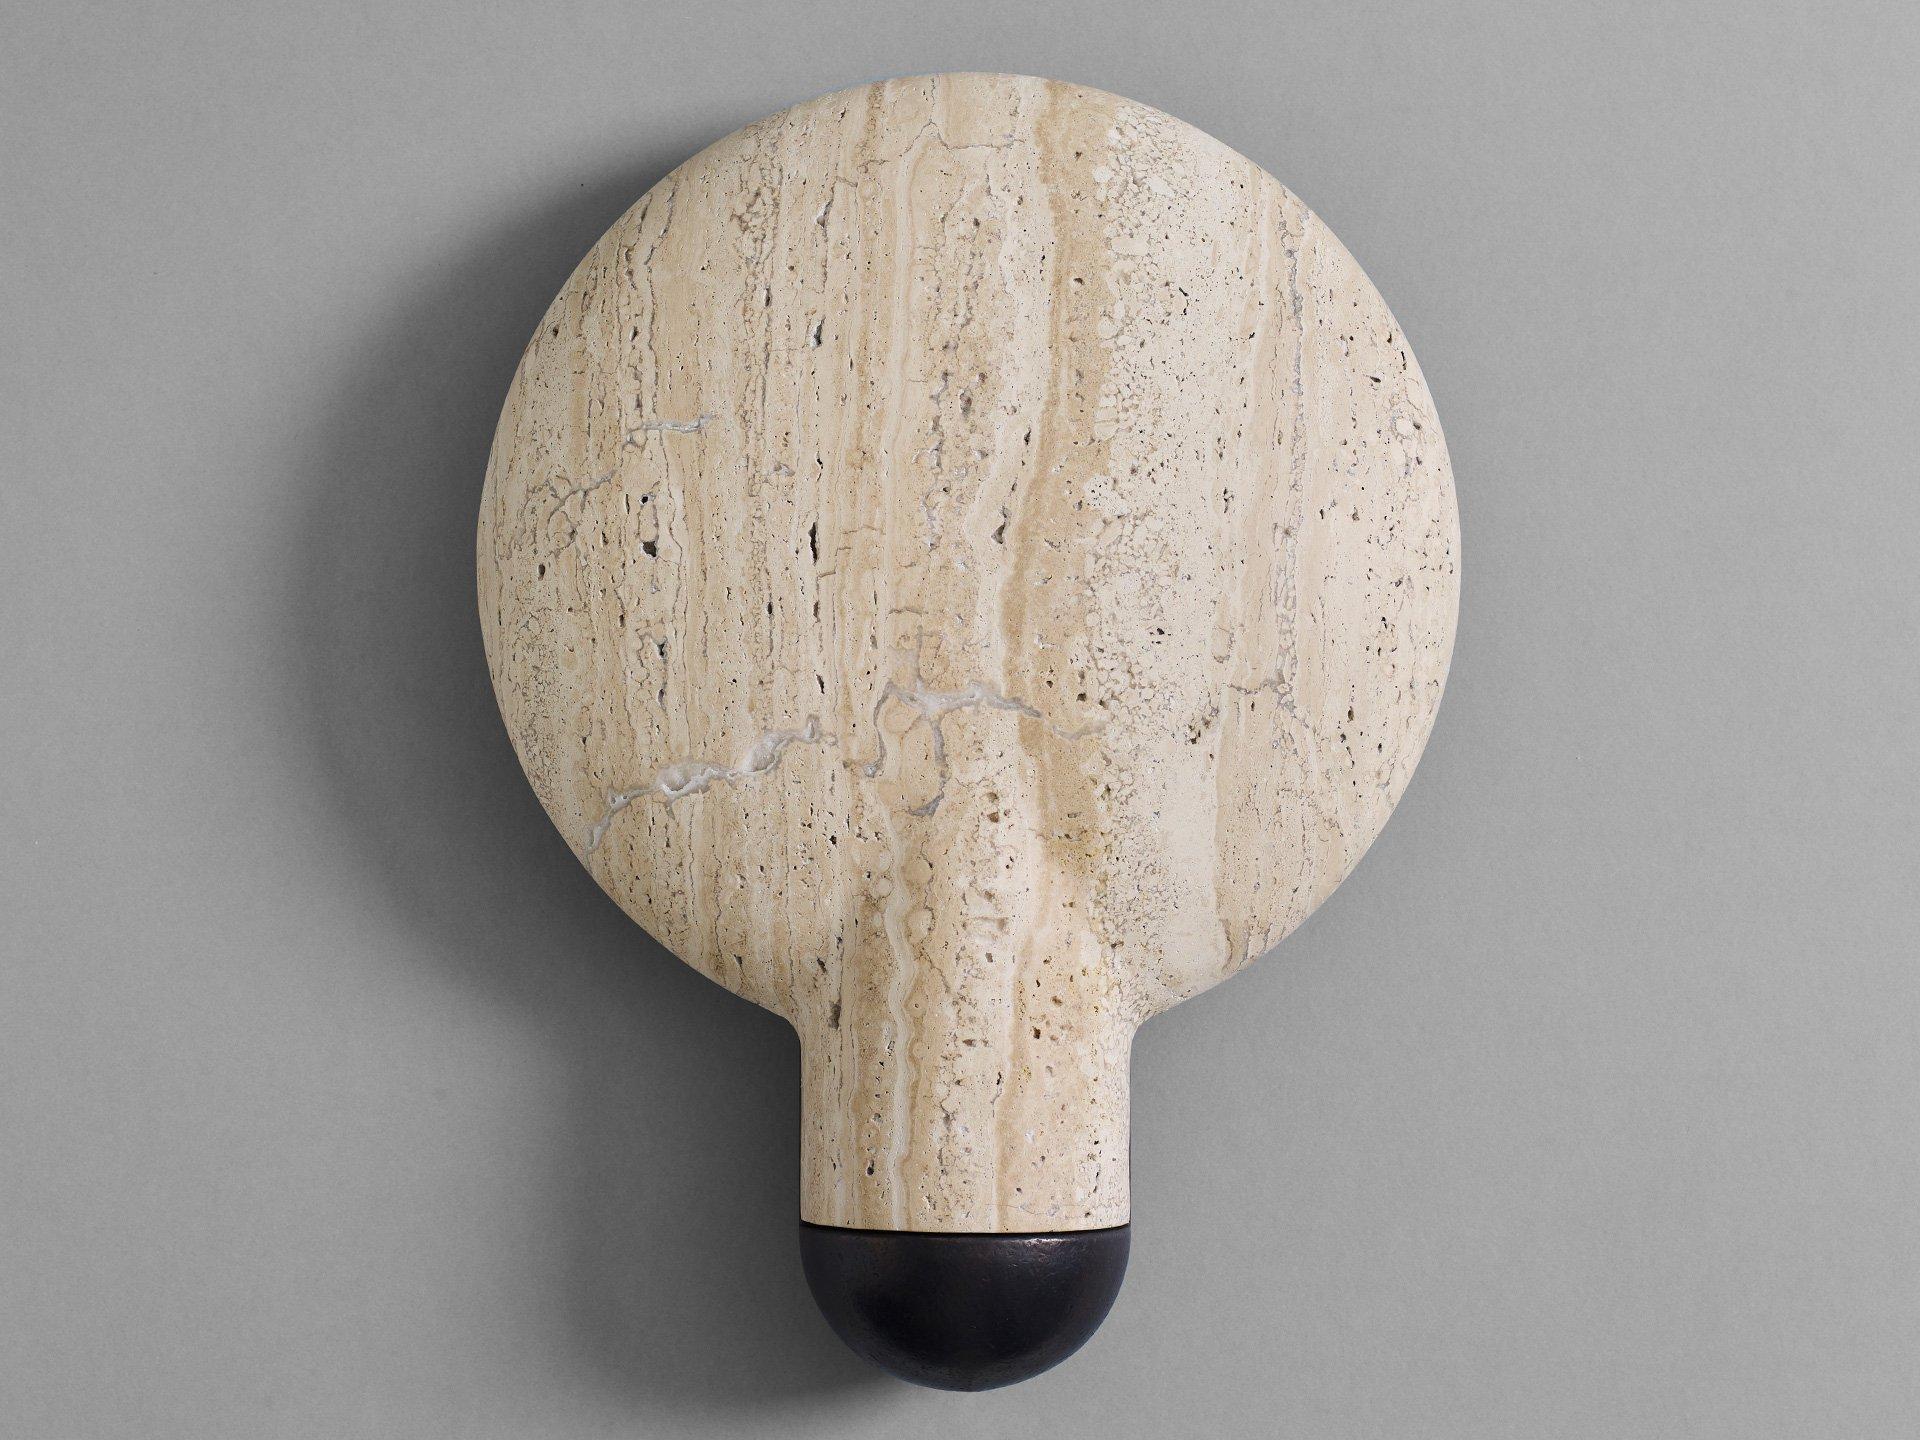 Classico Travertine Surface Wall Sconce by Henry Wilson
Dimensions: W 30 x D 11 x H 40 cm
Materials: Travertine

All our lamps can be wired according to each country. If sold to the USA it will be wired for the USA for instance.

Sandwiched between